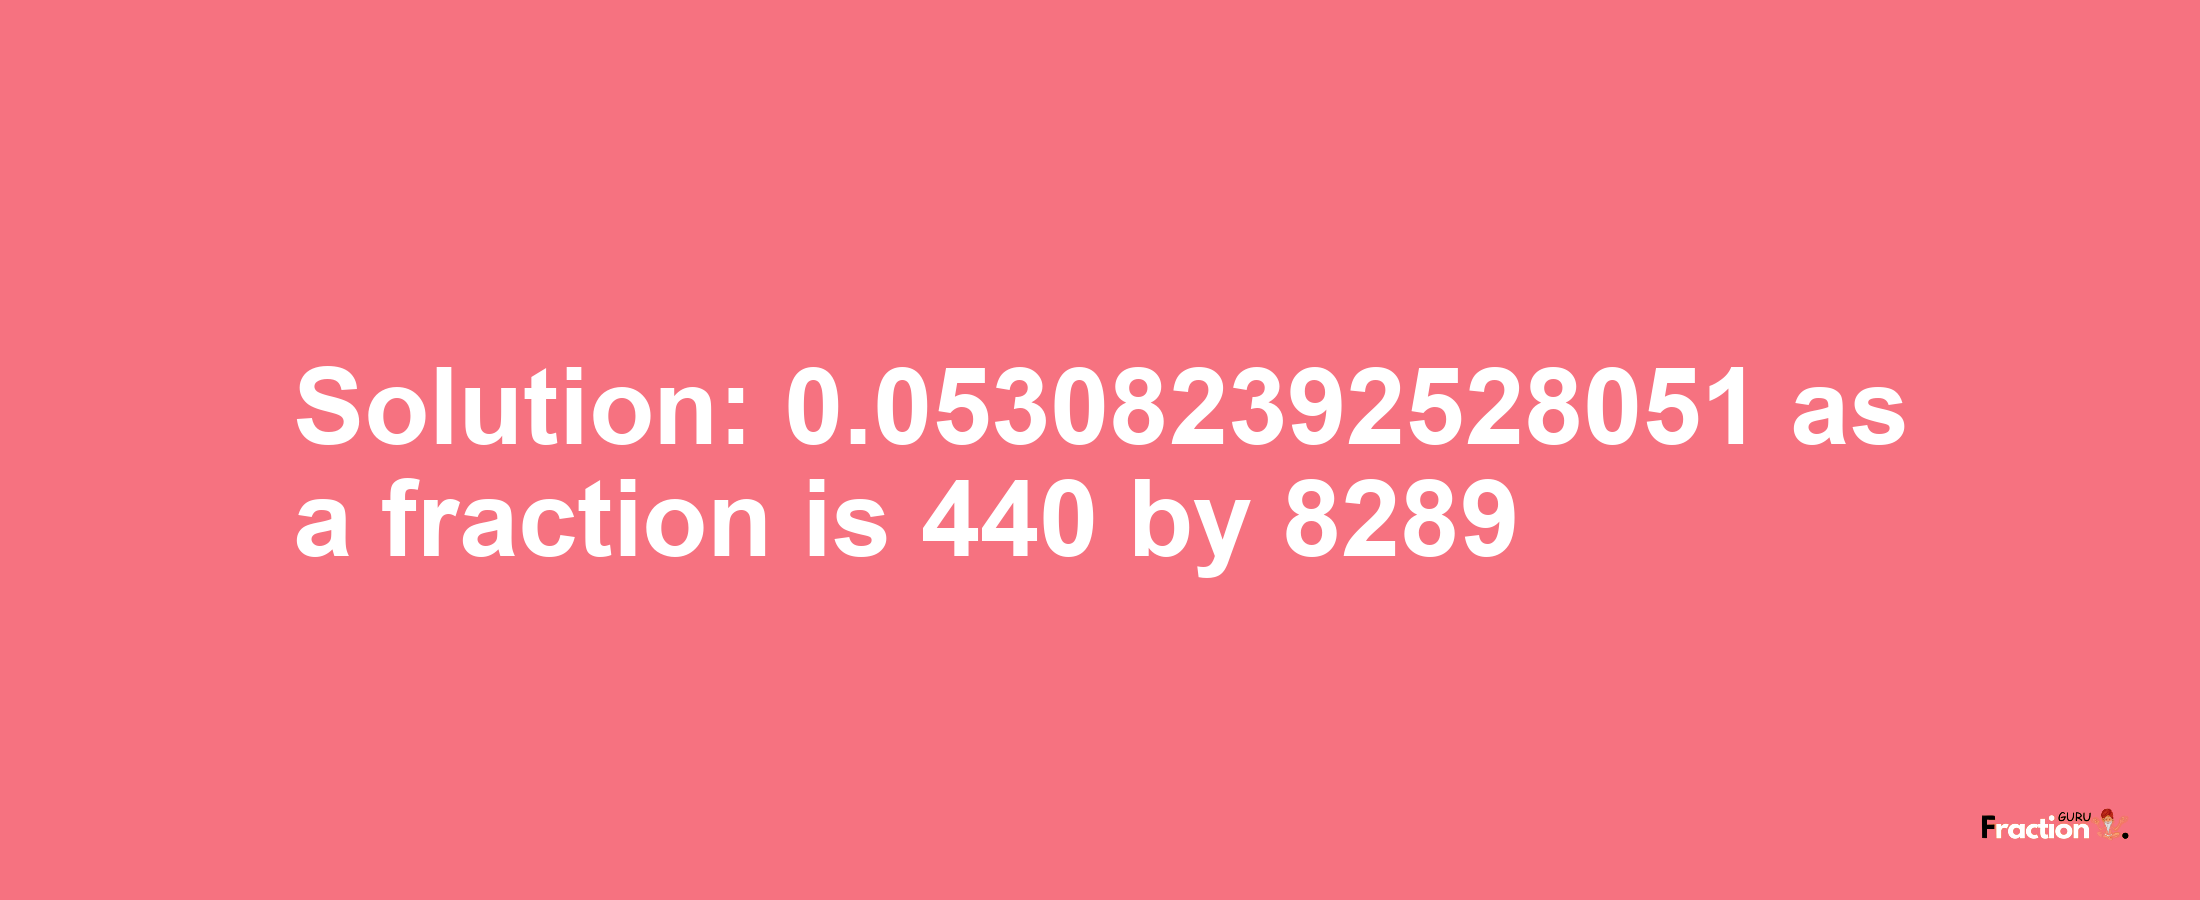 Solution:0.053082392528051 as a fraction is 440/8289